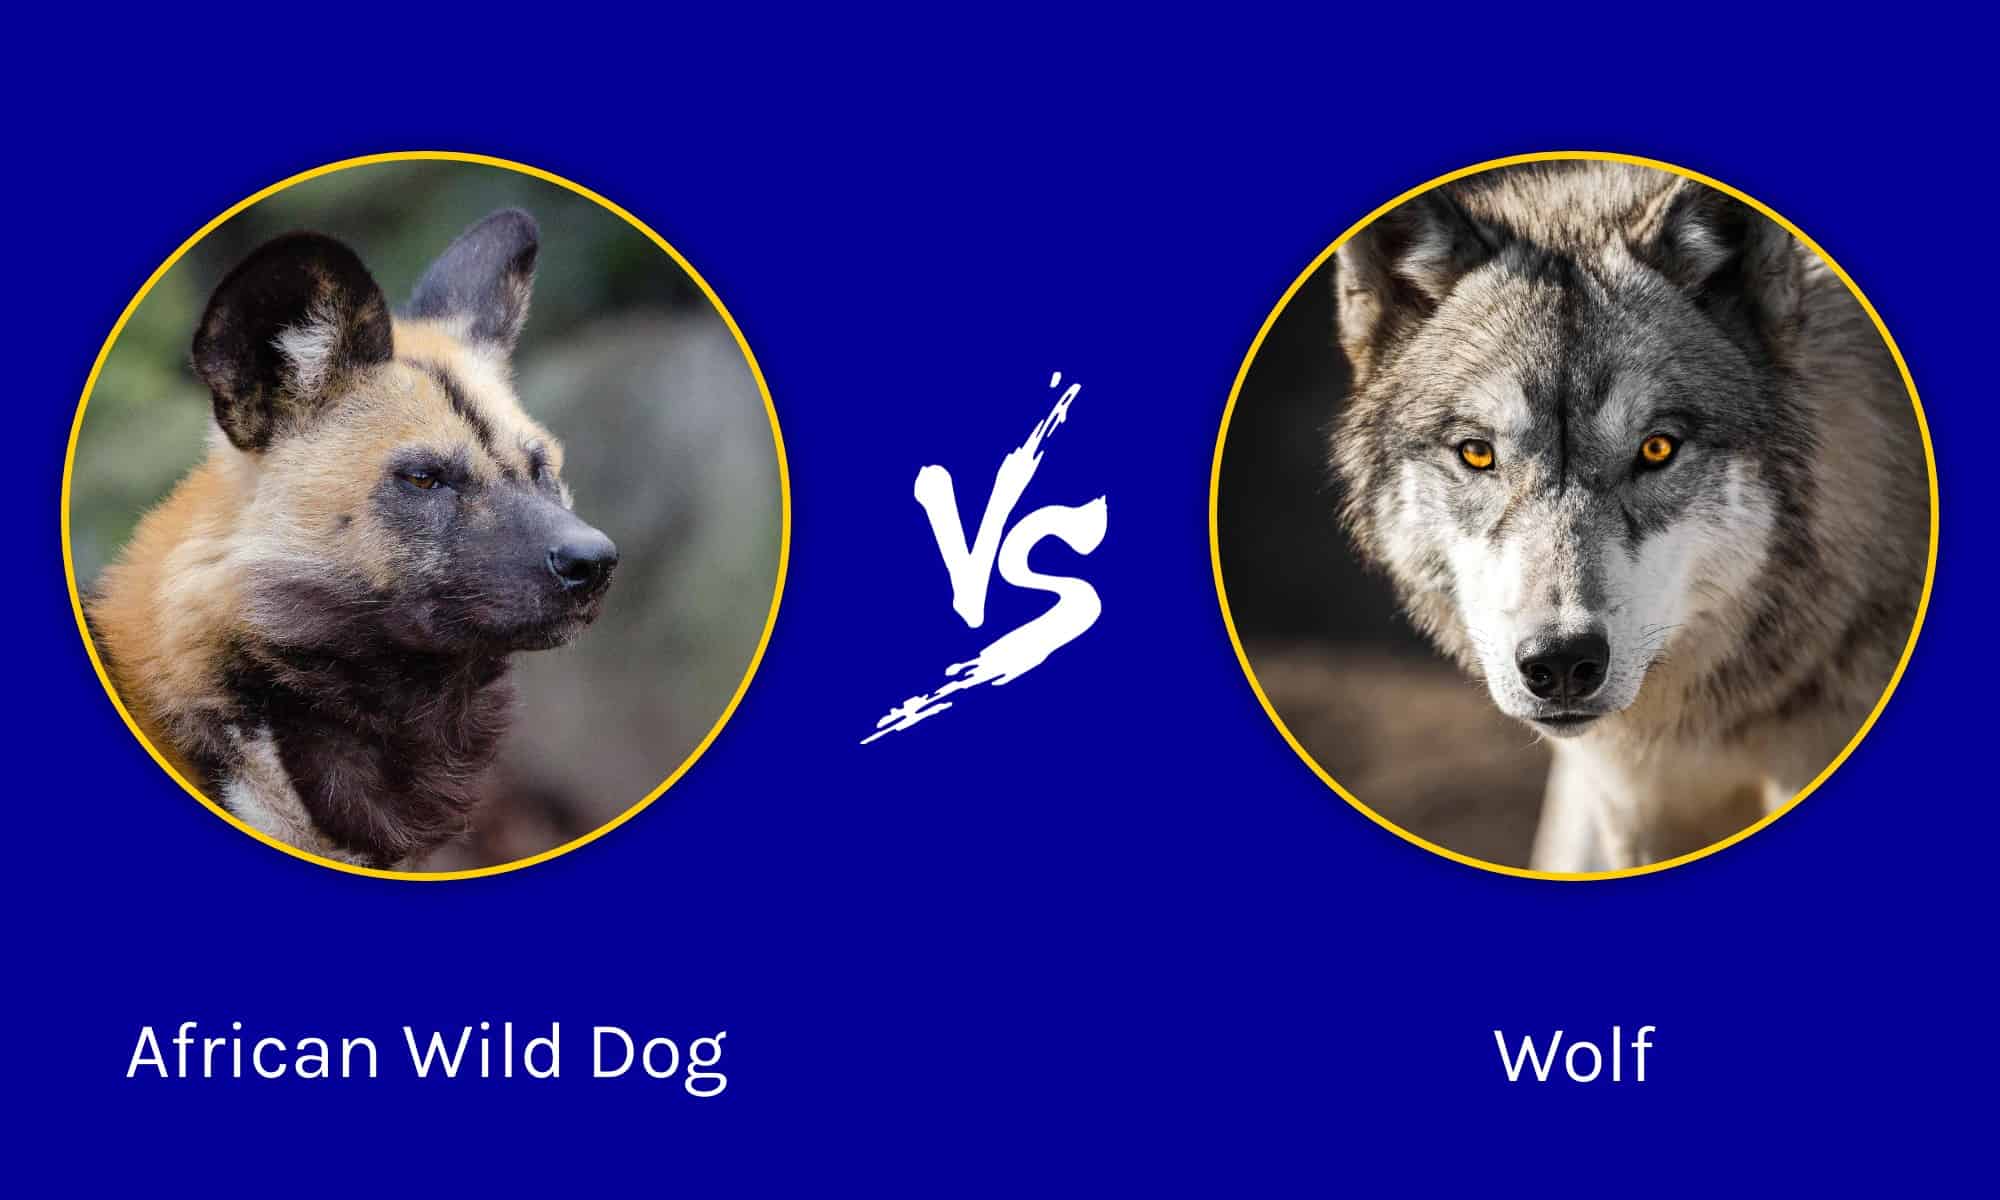 how do you tell the difference between a wolf and a dog